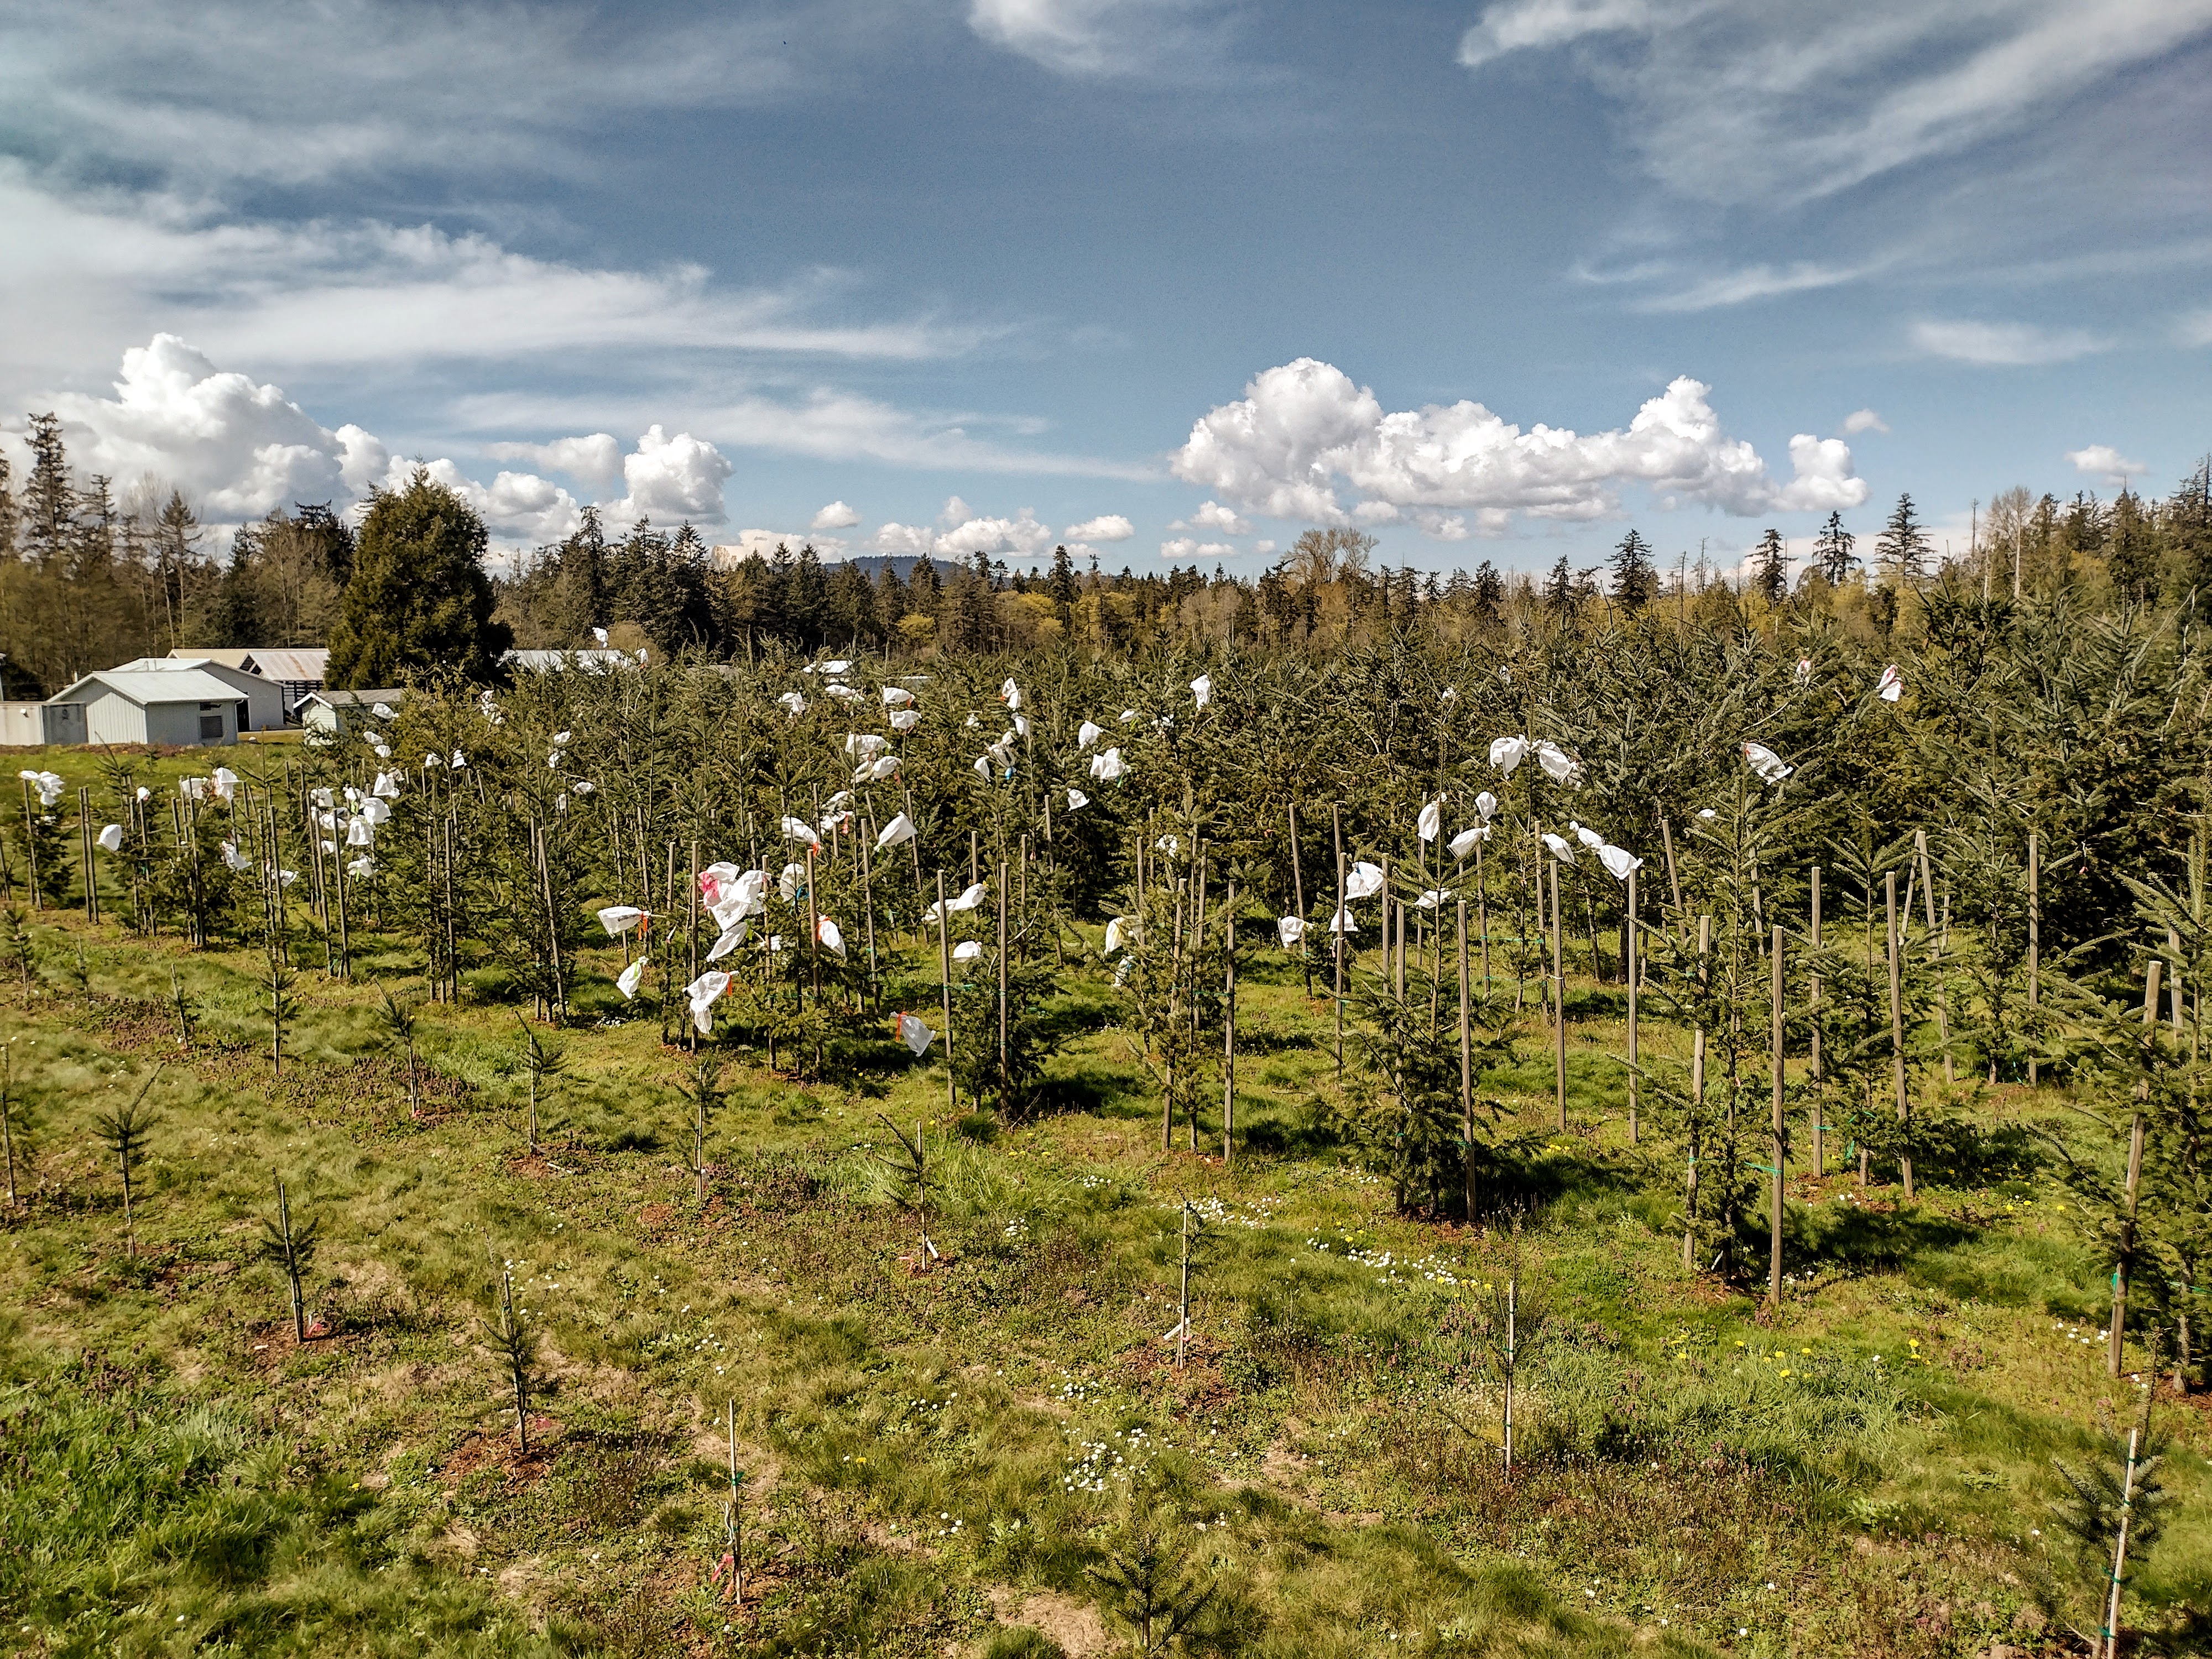 Photo of a field of rows of young fir trees in the sun with plastic bags tied over some branch tips.